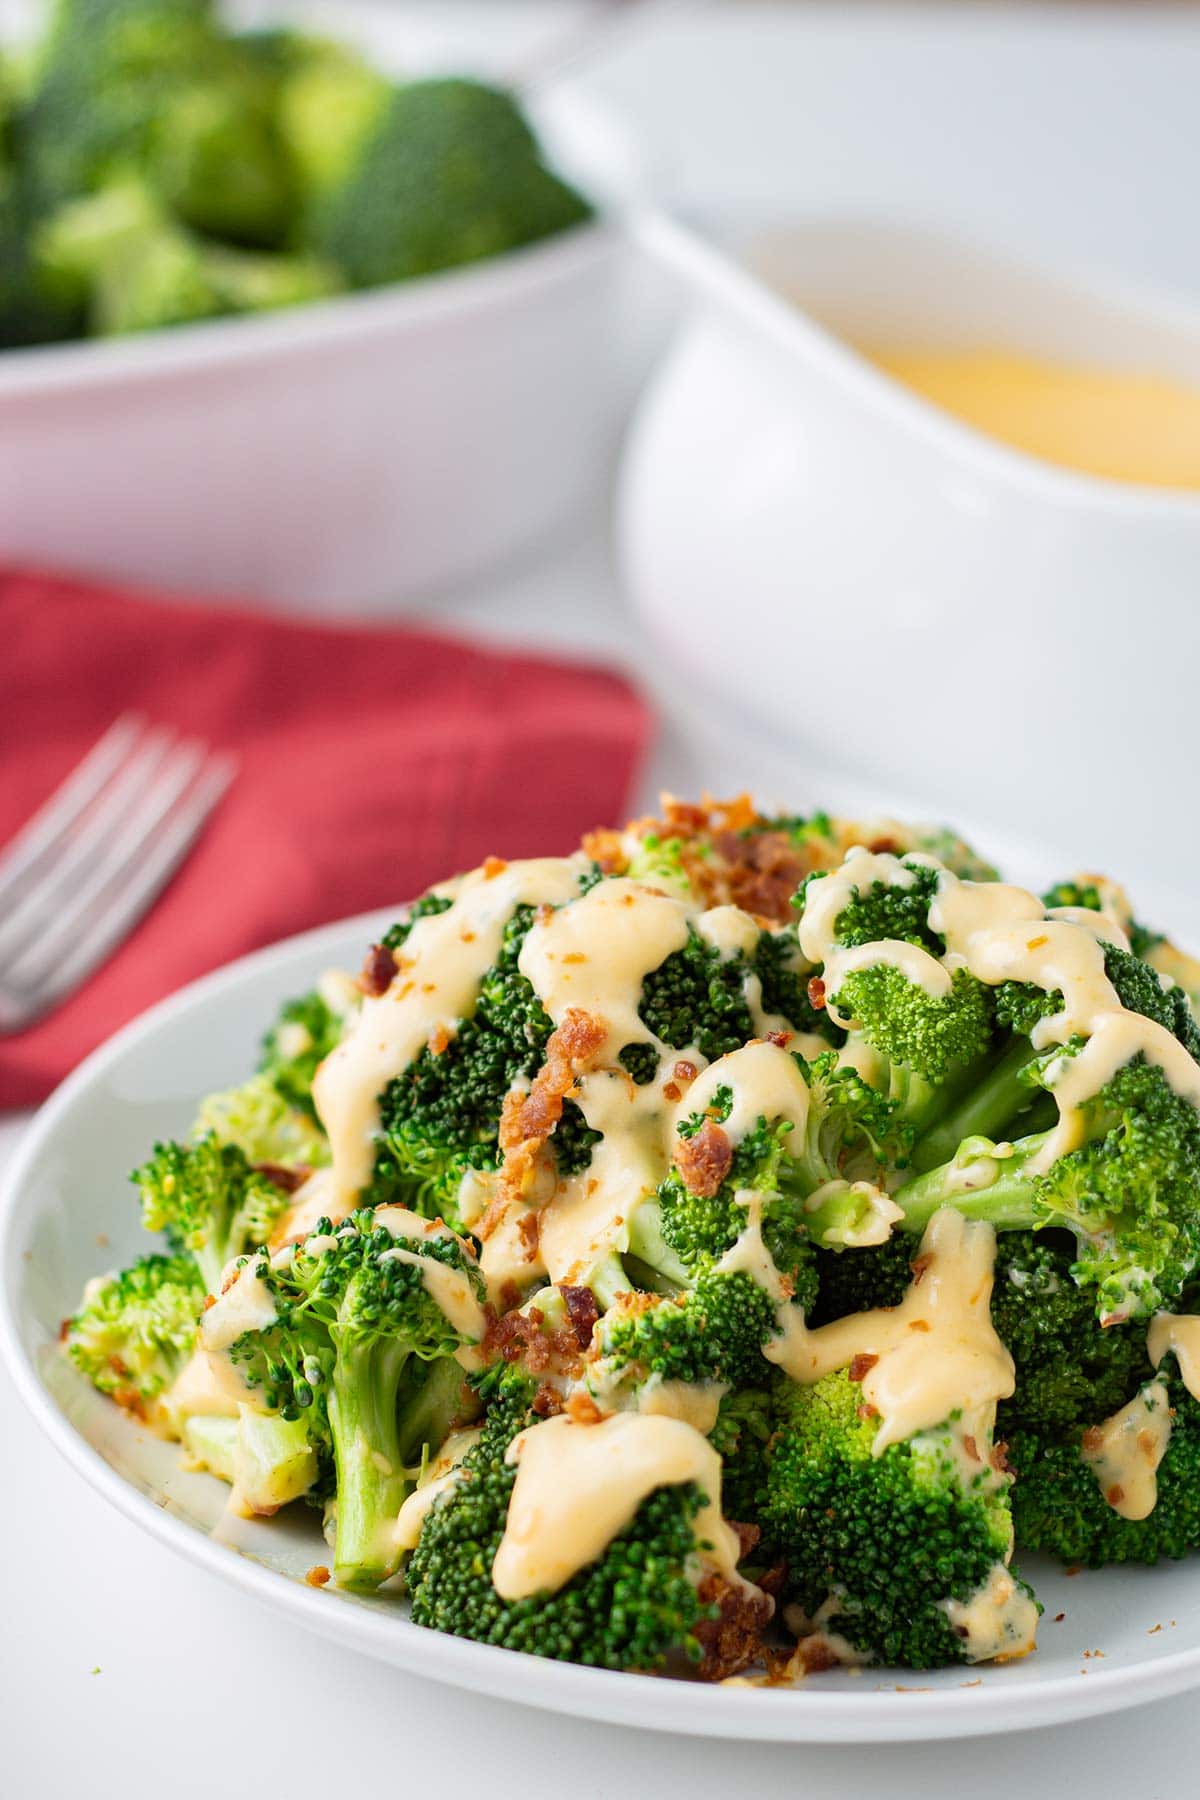 Plate of broccoli drizzled with freezer cheese sauce and garnished with crumbled bacon.